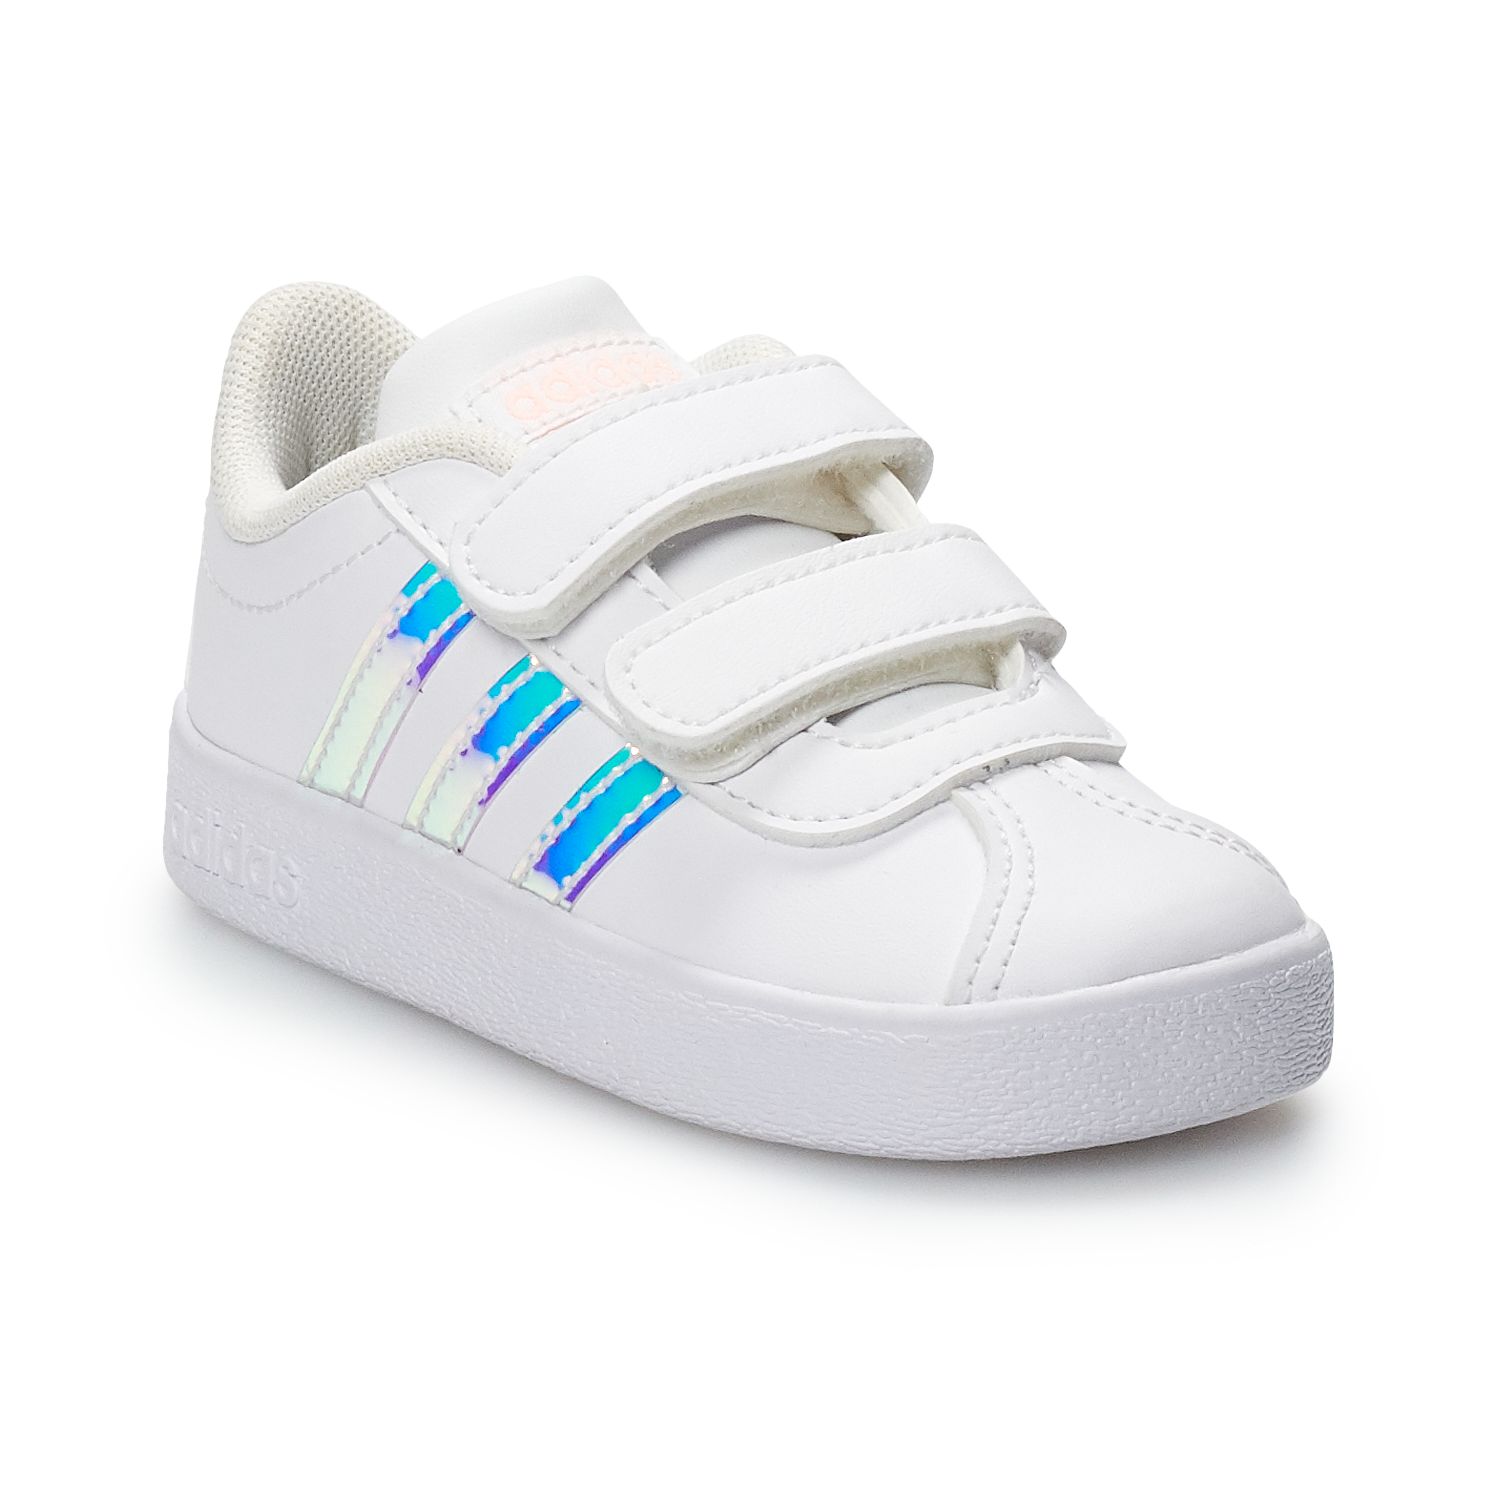 adidas vl court 2.0 toddler sneakers